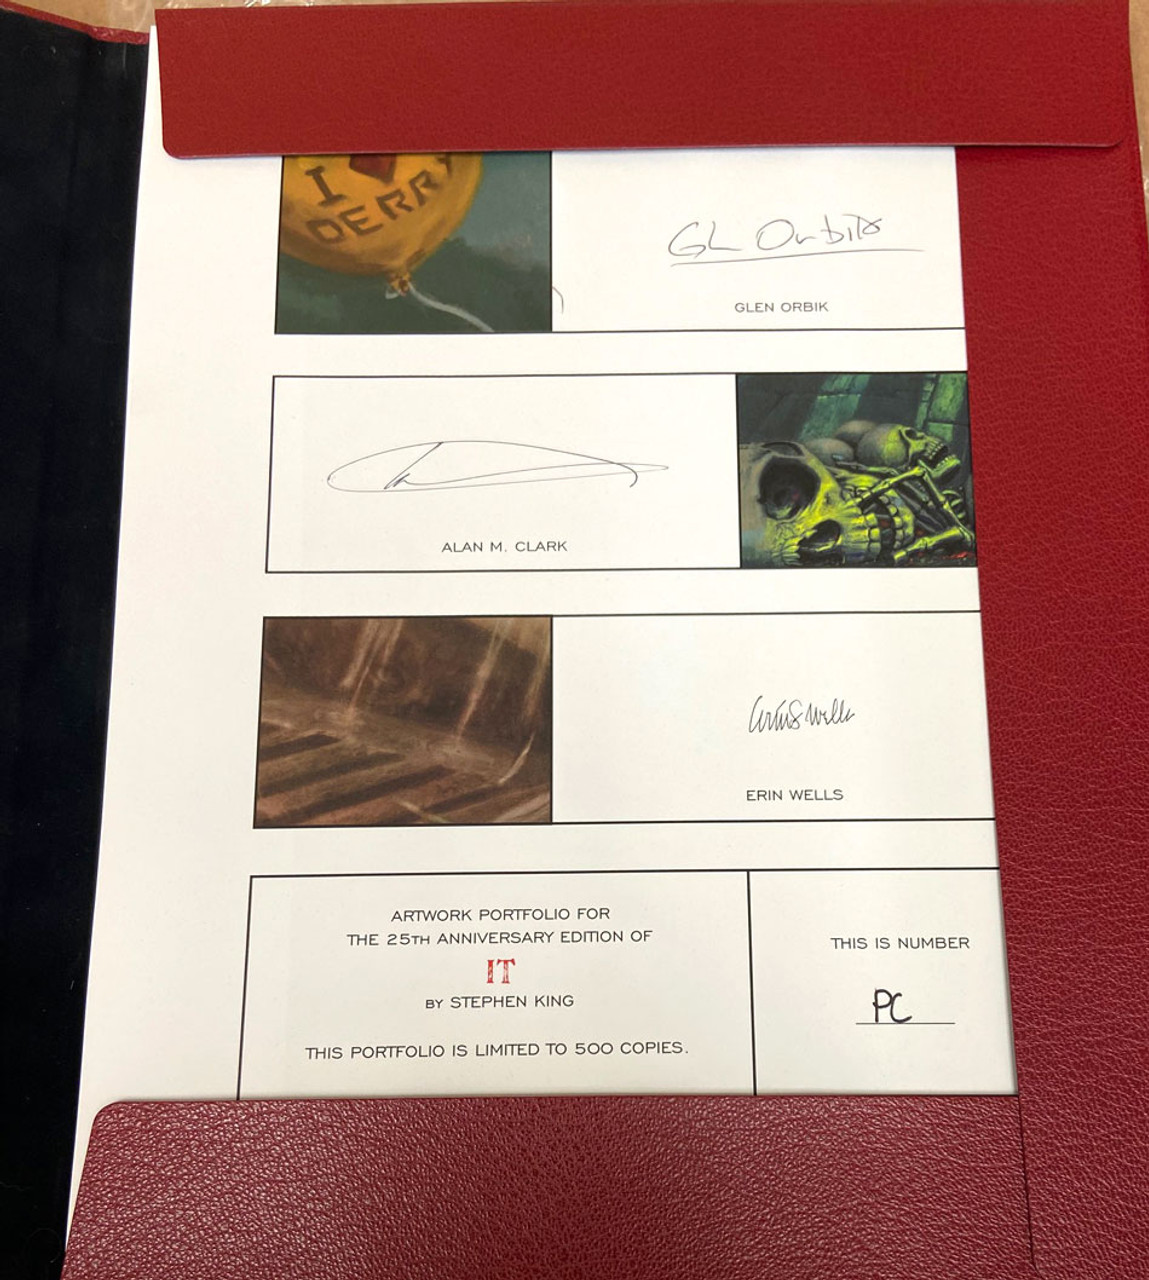 Stephen King "IT" Signed Limited Deluxe Edition, 25th Anniversary Edition No. 171 of only 750 Traycased + Matching Artwork Portfolio "PC" [Very Fine]